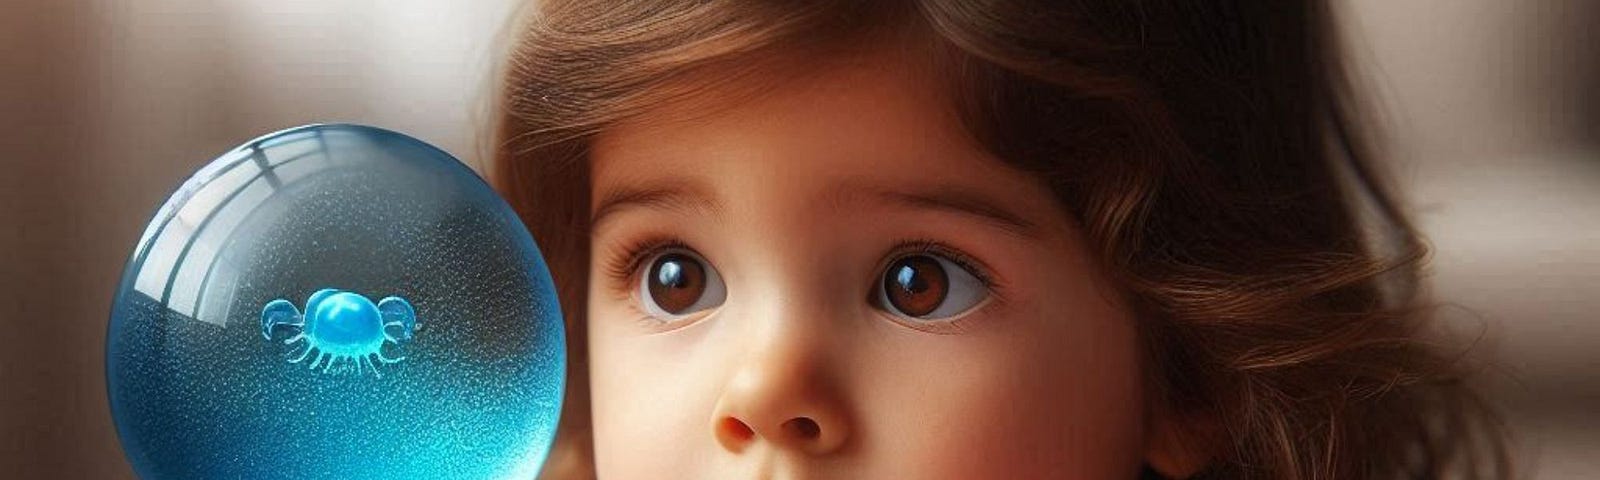 A little girl stares at a light blue sphere